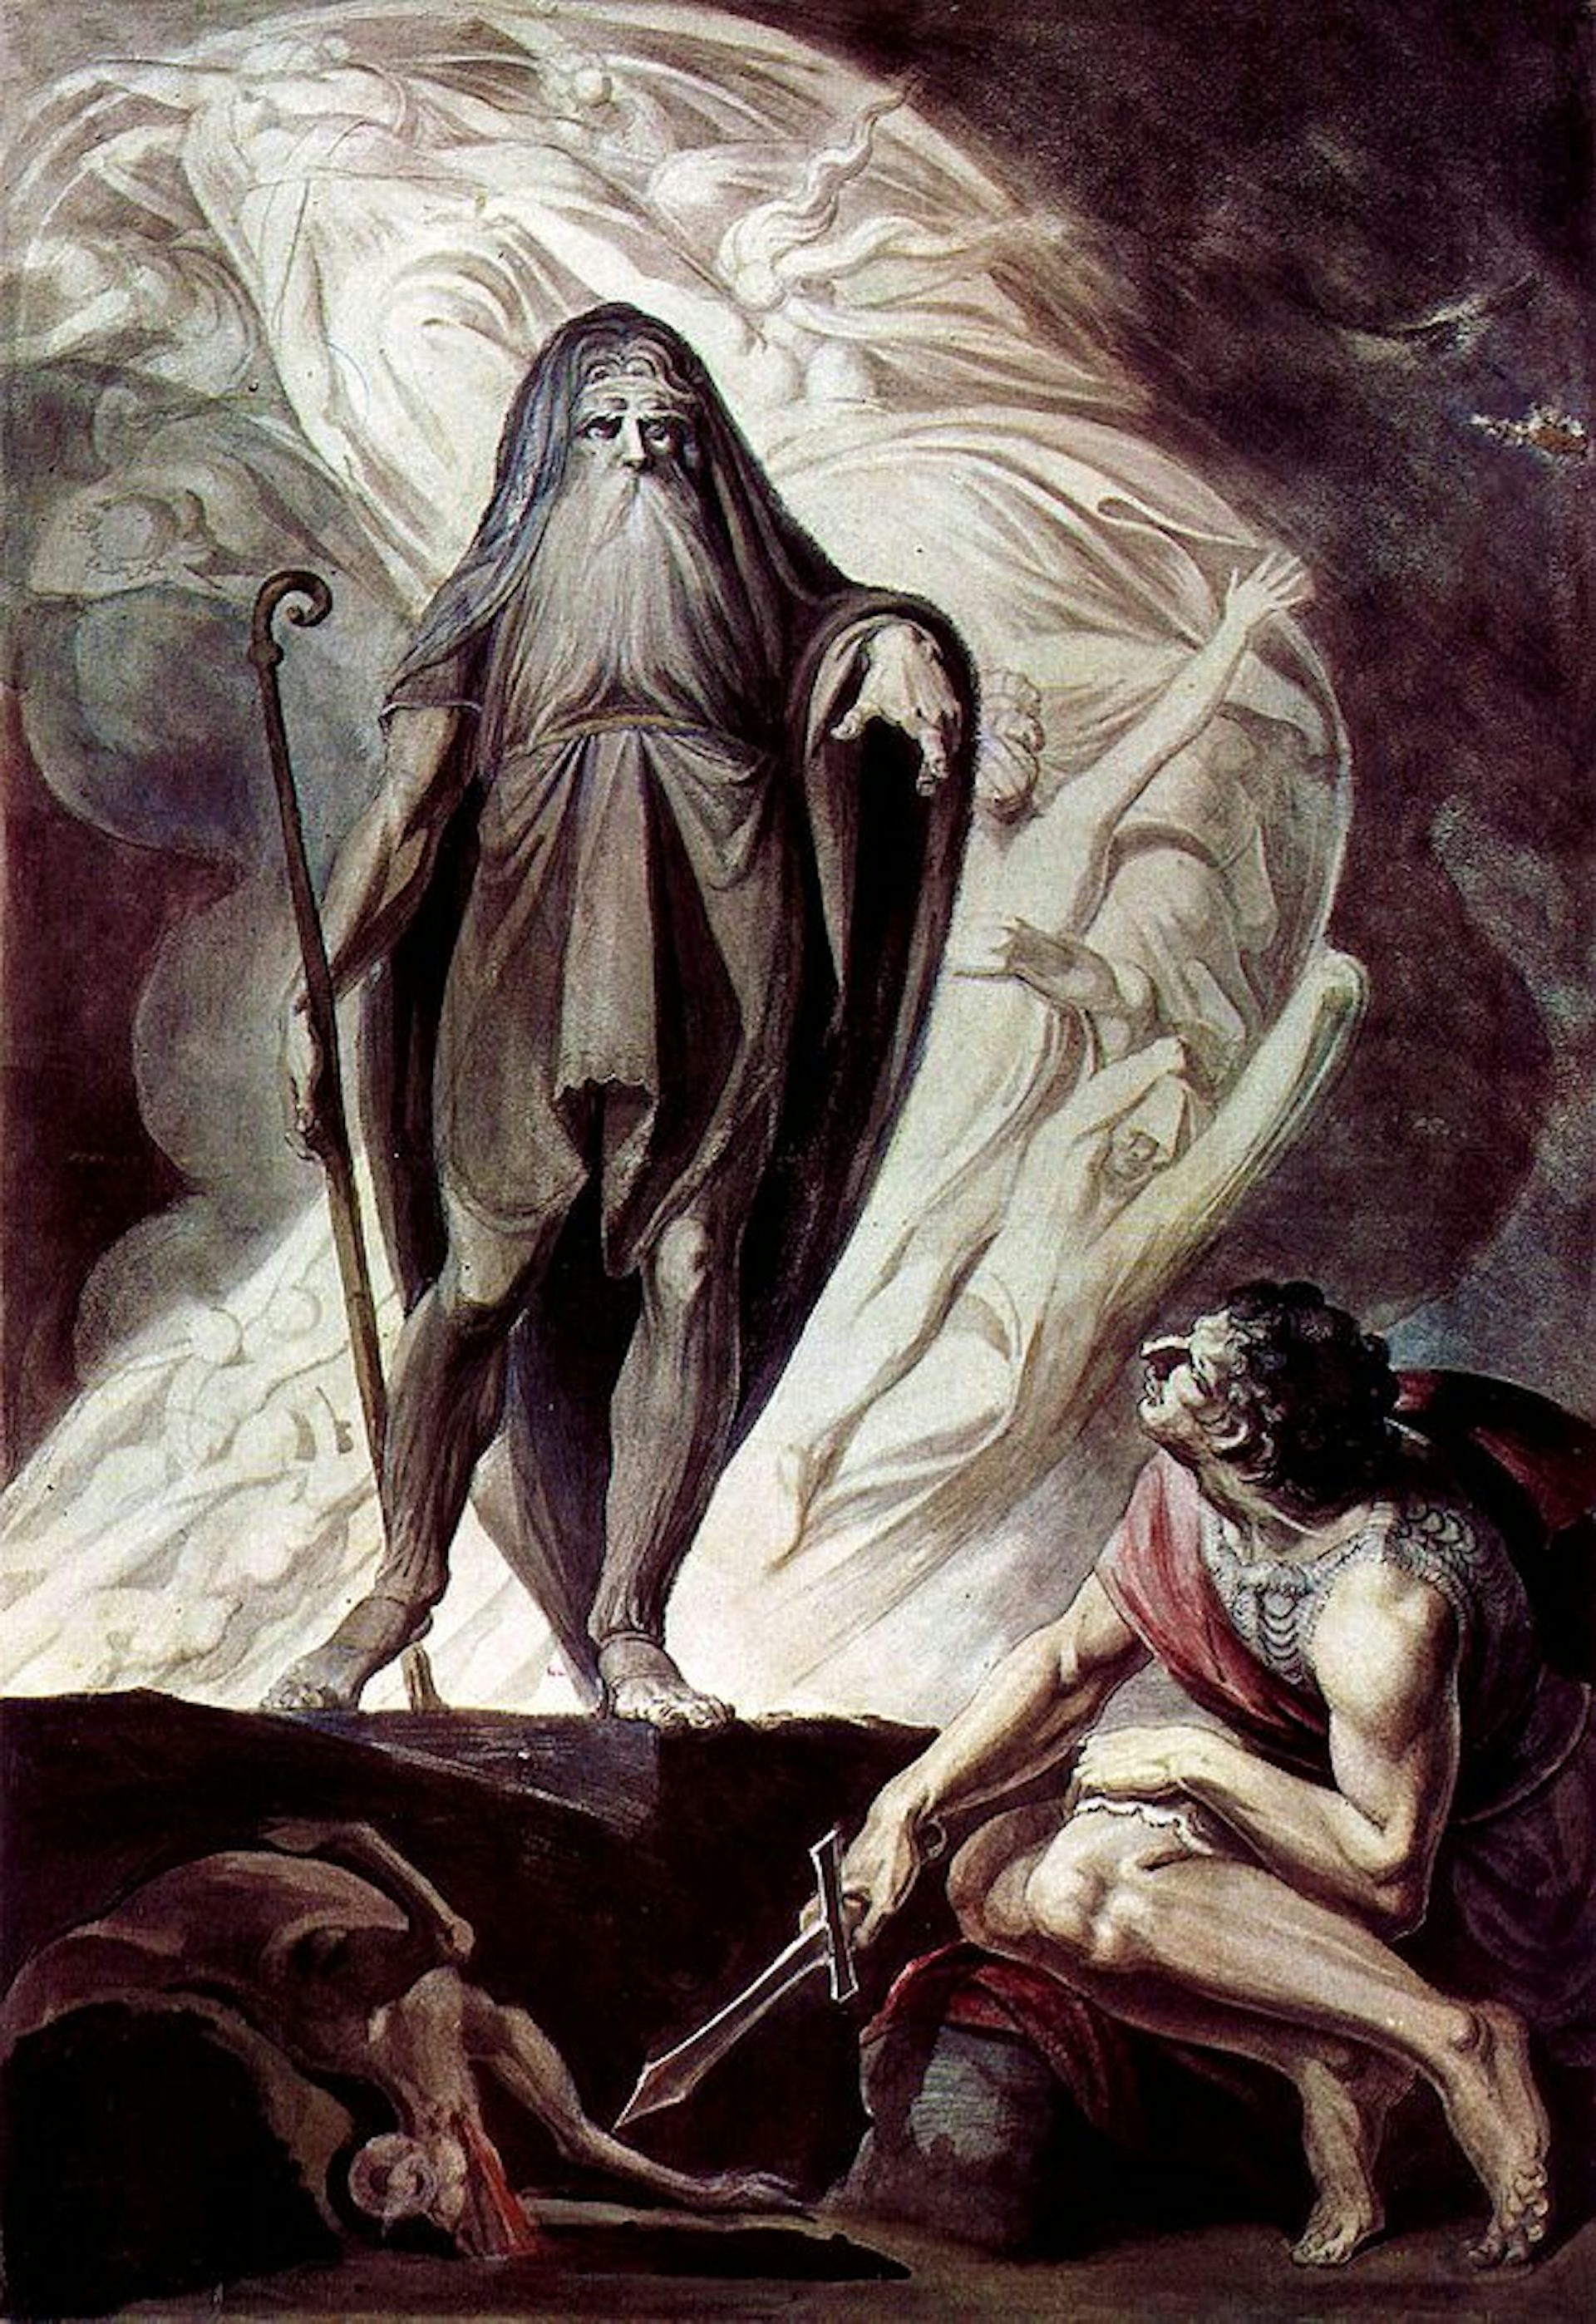 Tiresias Appearing to Odysseus by Henry Fuseli (1780–1785).